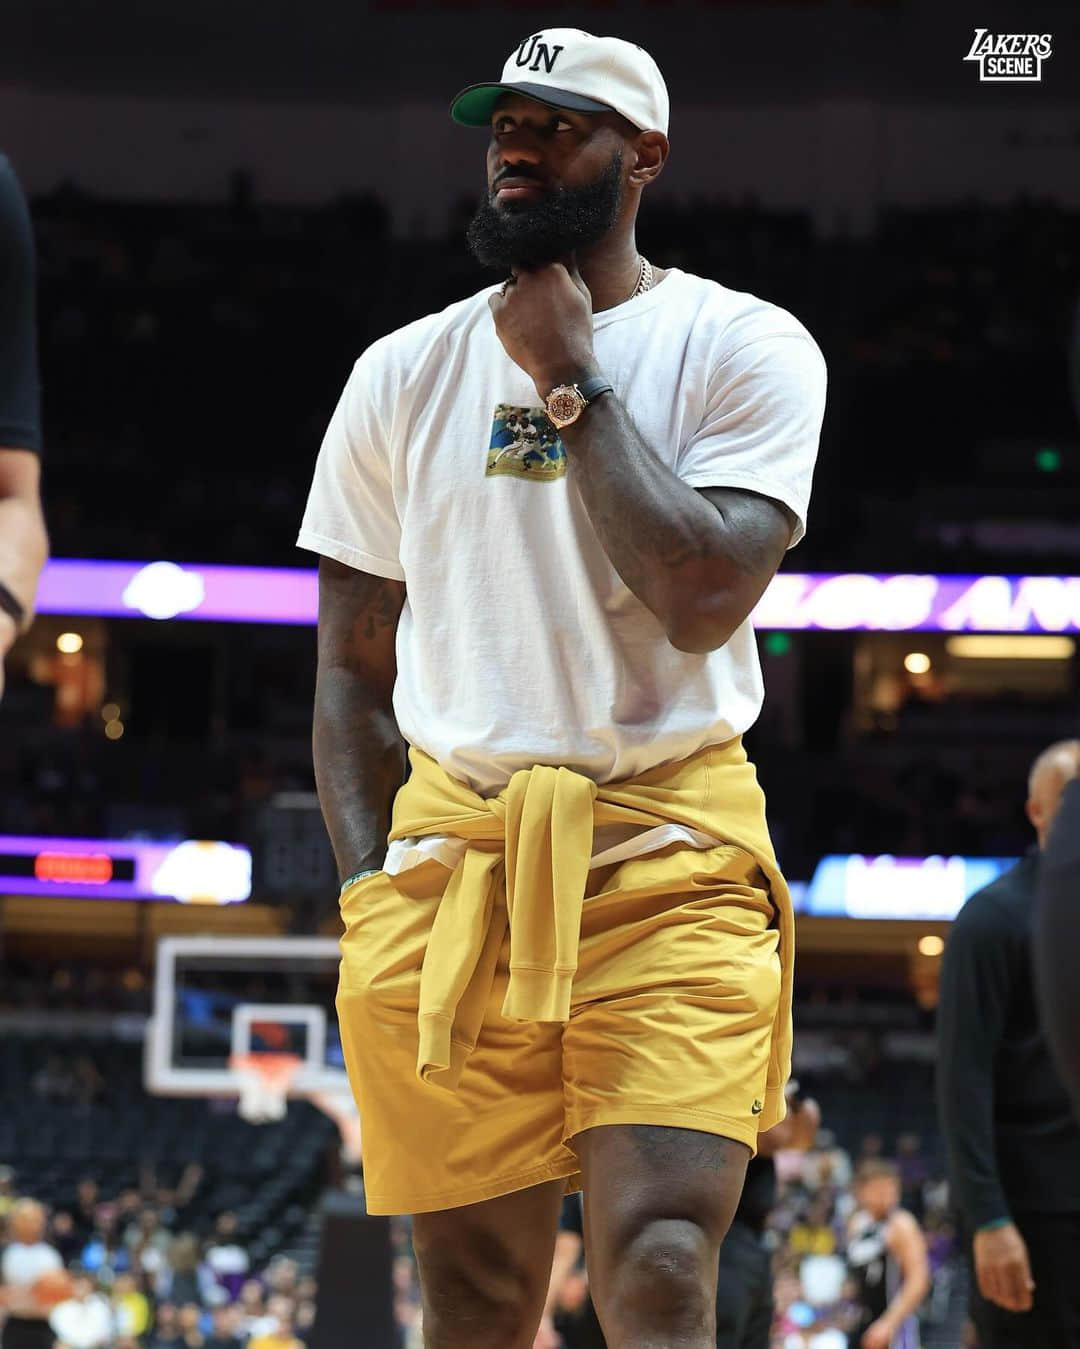 Lebron James Flaunts His Rolex 'eye Of The Tiger' Cosmograph Daytona On The Way To A Lakers Game - Car Magazine TV